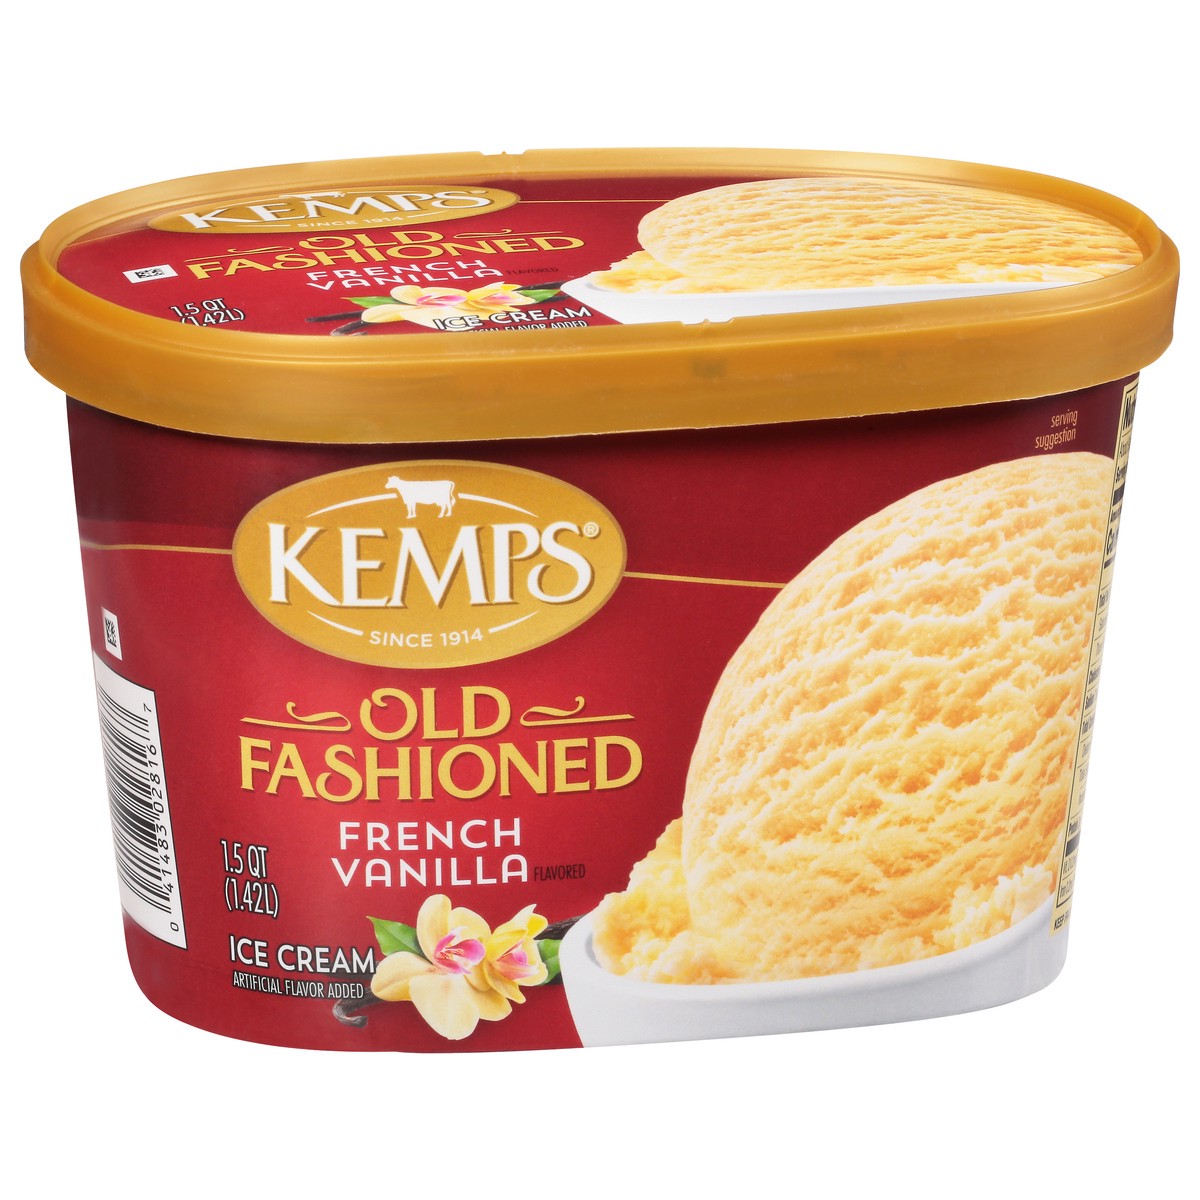 slide 2 of 9, Kemps Old Fashioned French Vanilla Ice Cream, 1.5 qt